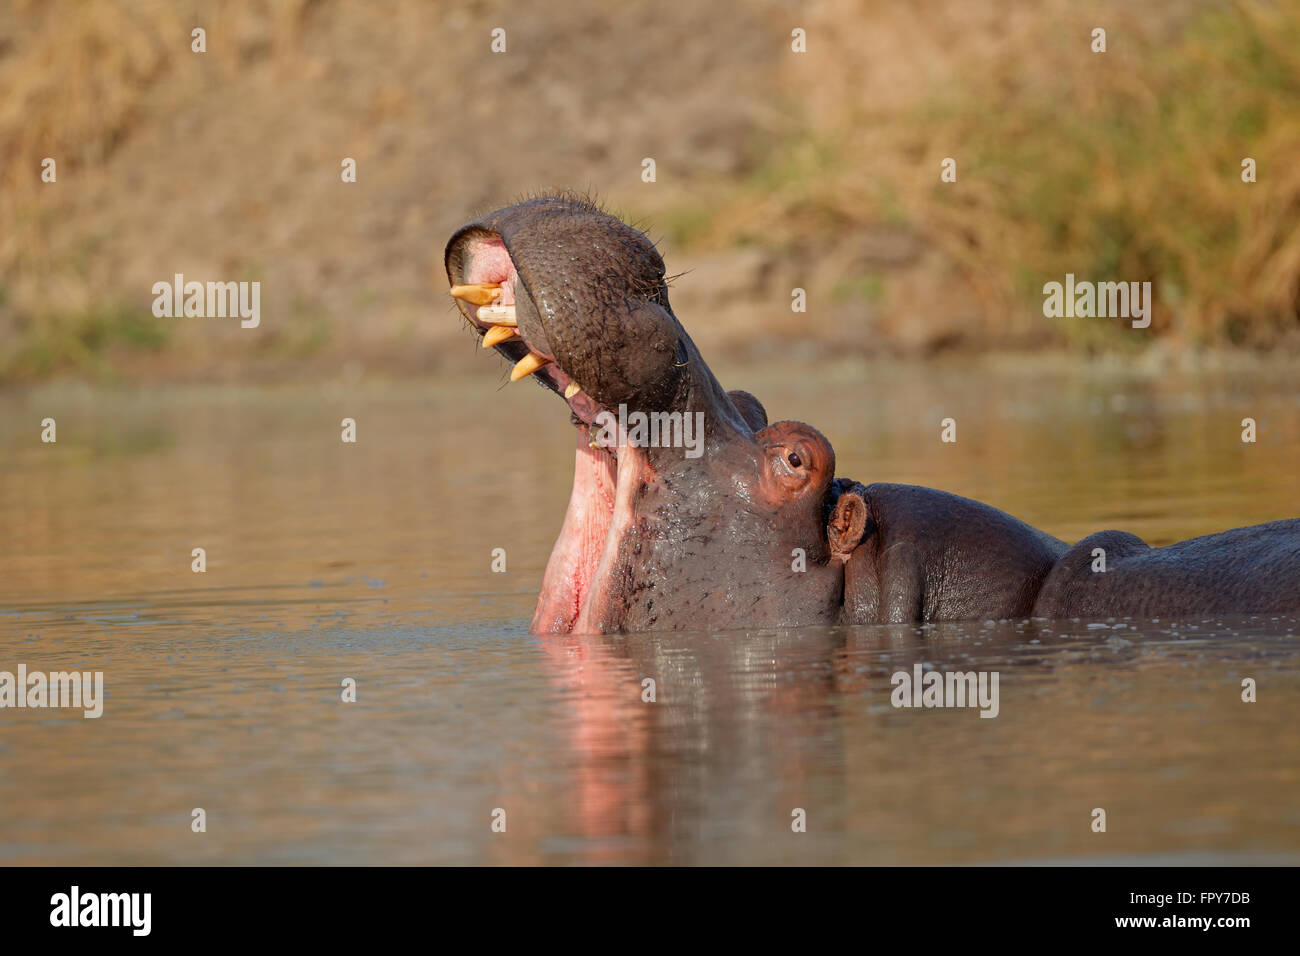 Hippo (Hippopotamus amphibius) with open mouth, Sabie-Sand nature reserve, South Africa Stock Photo